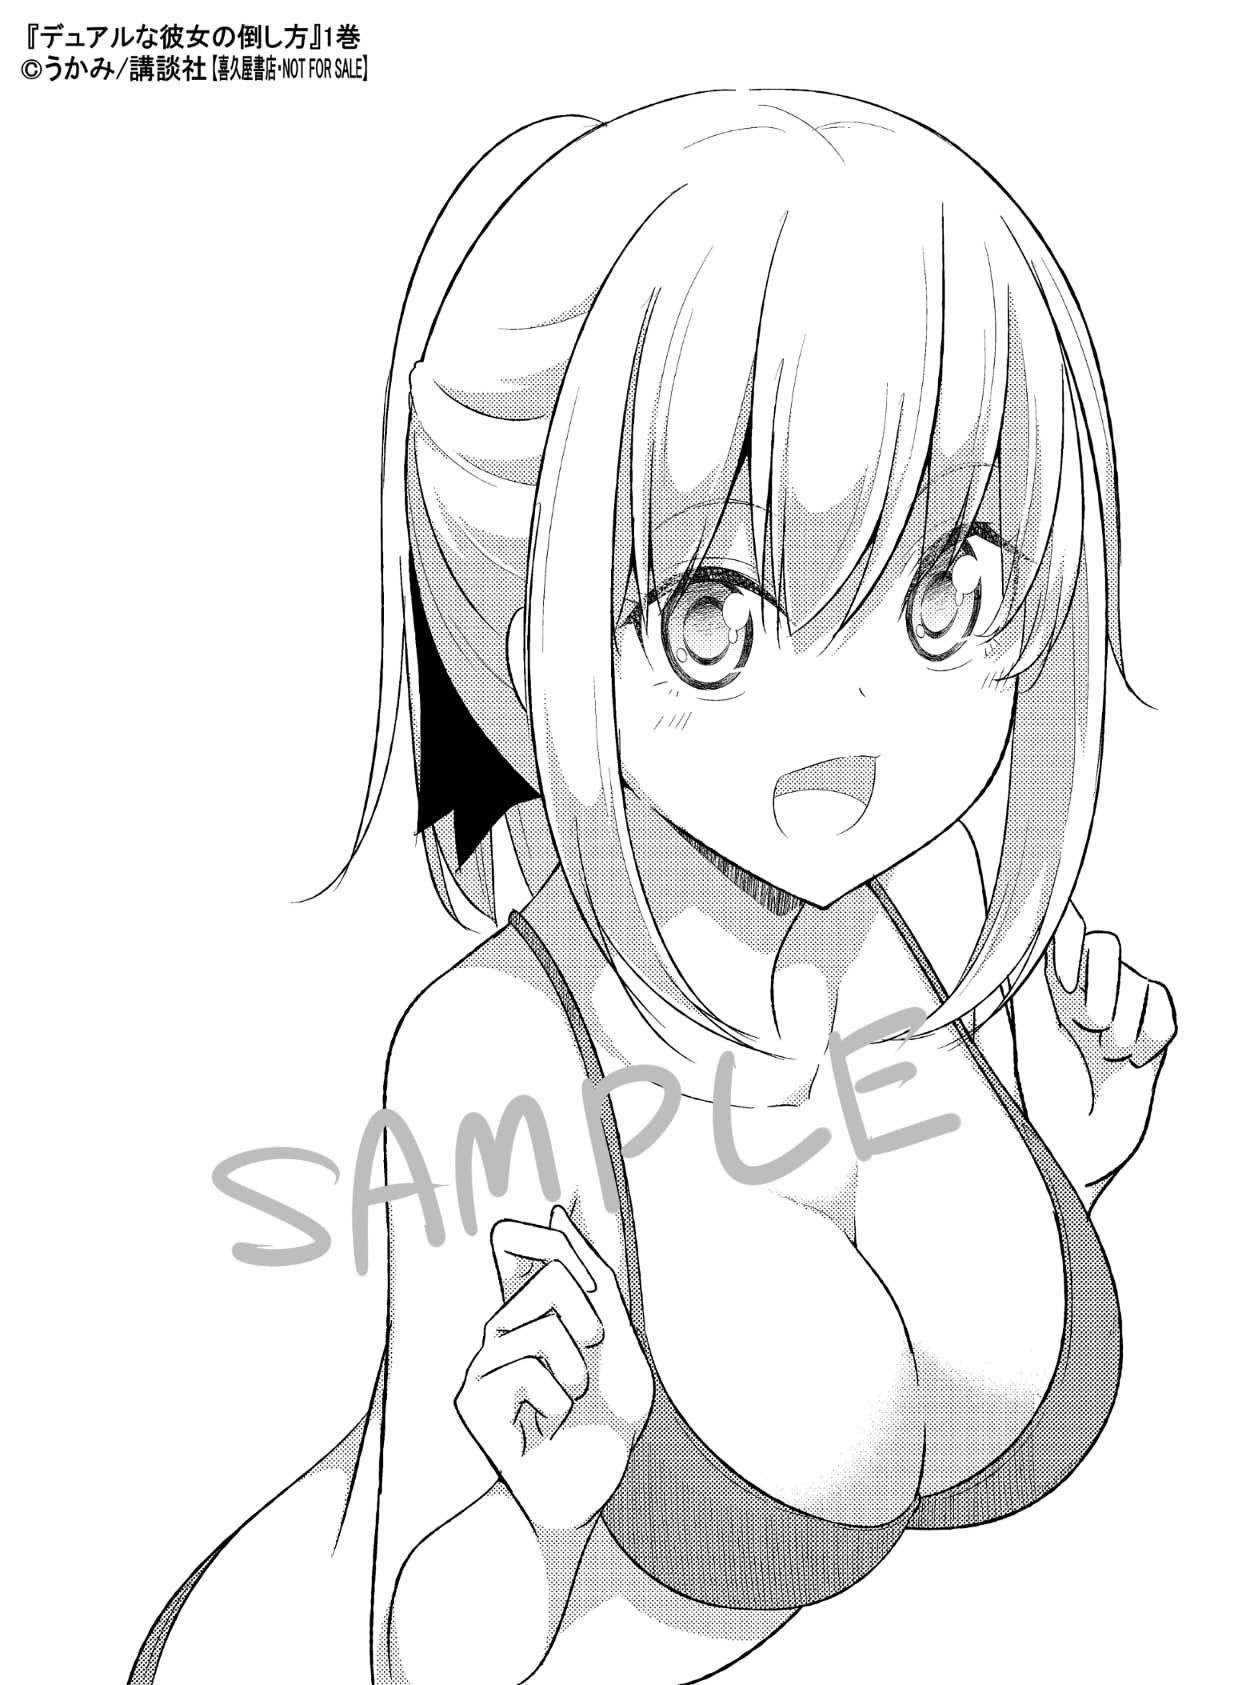 Image: Gavril Dropout author's new heroine is too naughty wwwwwwww 6